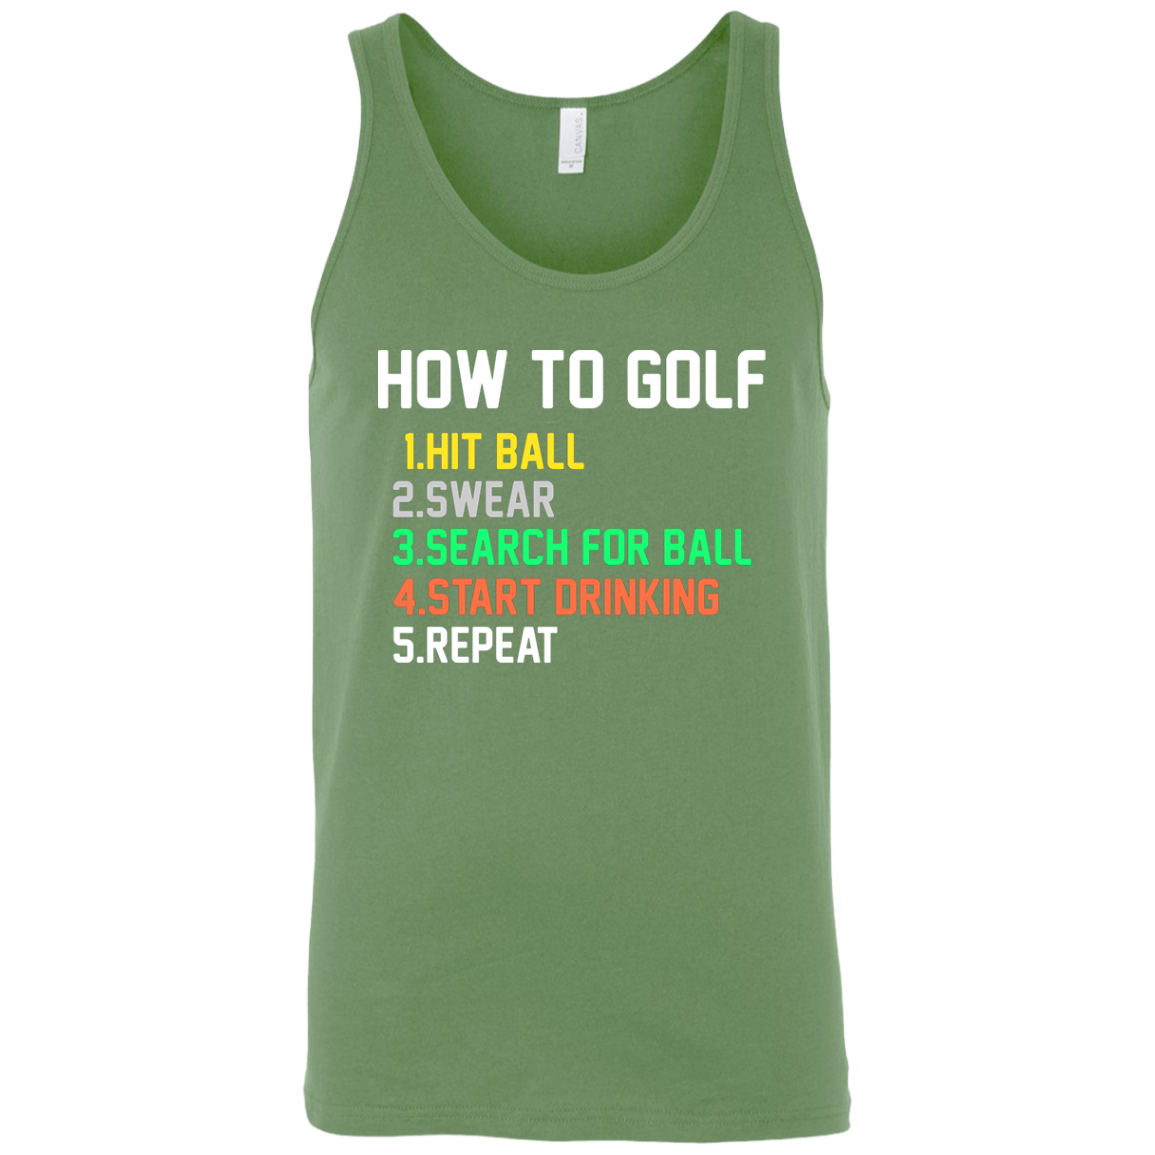 How To Golf Tank Top Apparel - The Beer Lodge